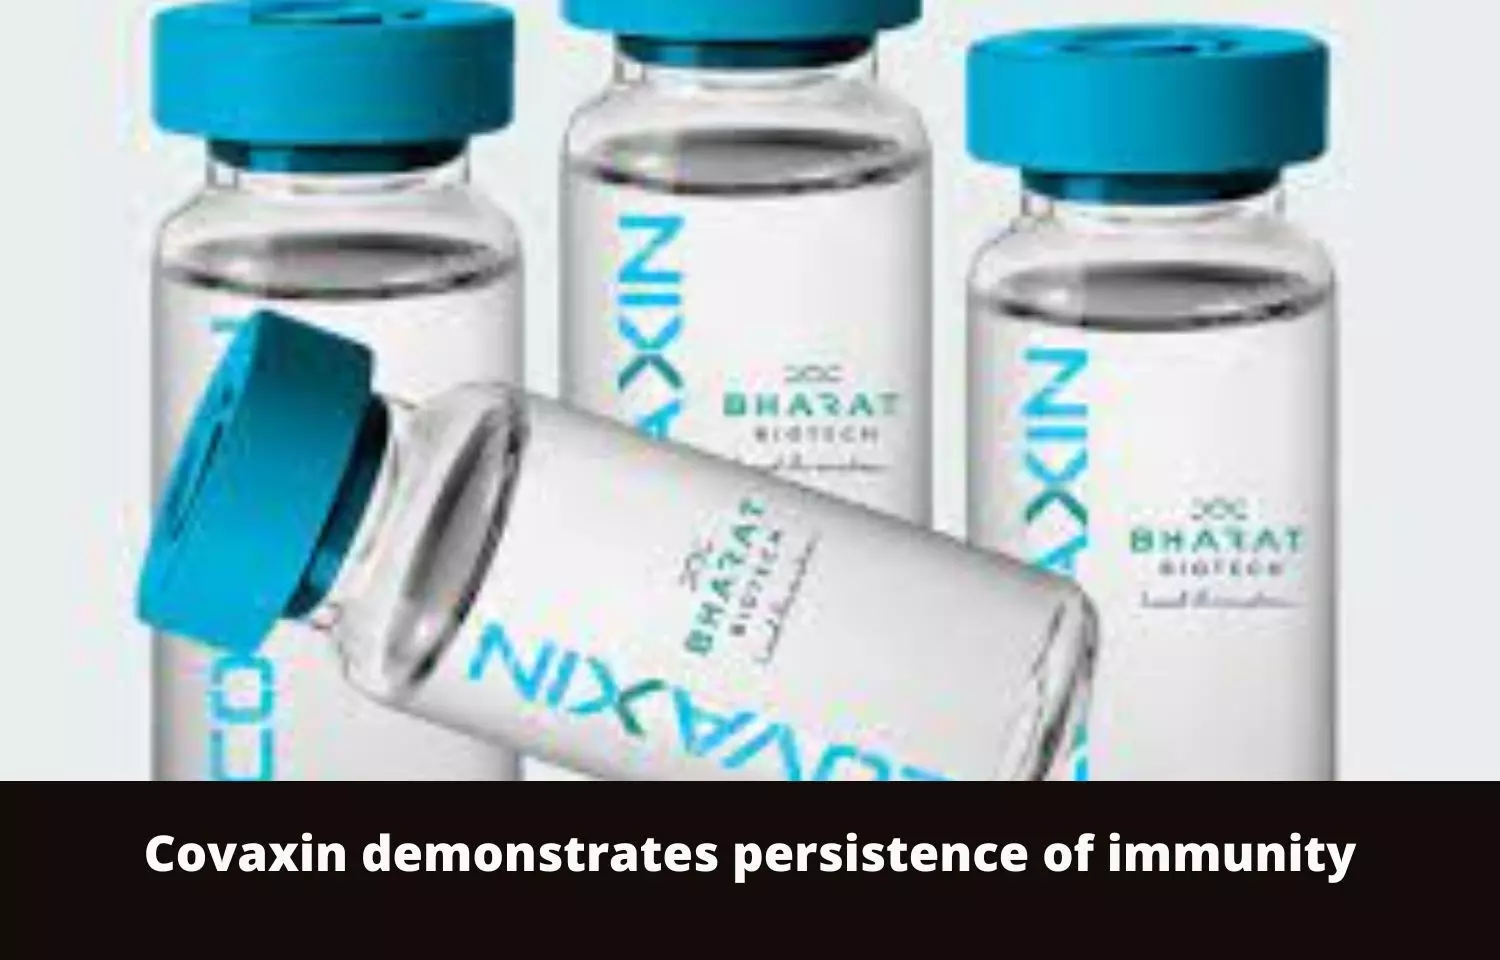 Covaxin booster dose increases immune response by 40 times: Bharat Biotech